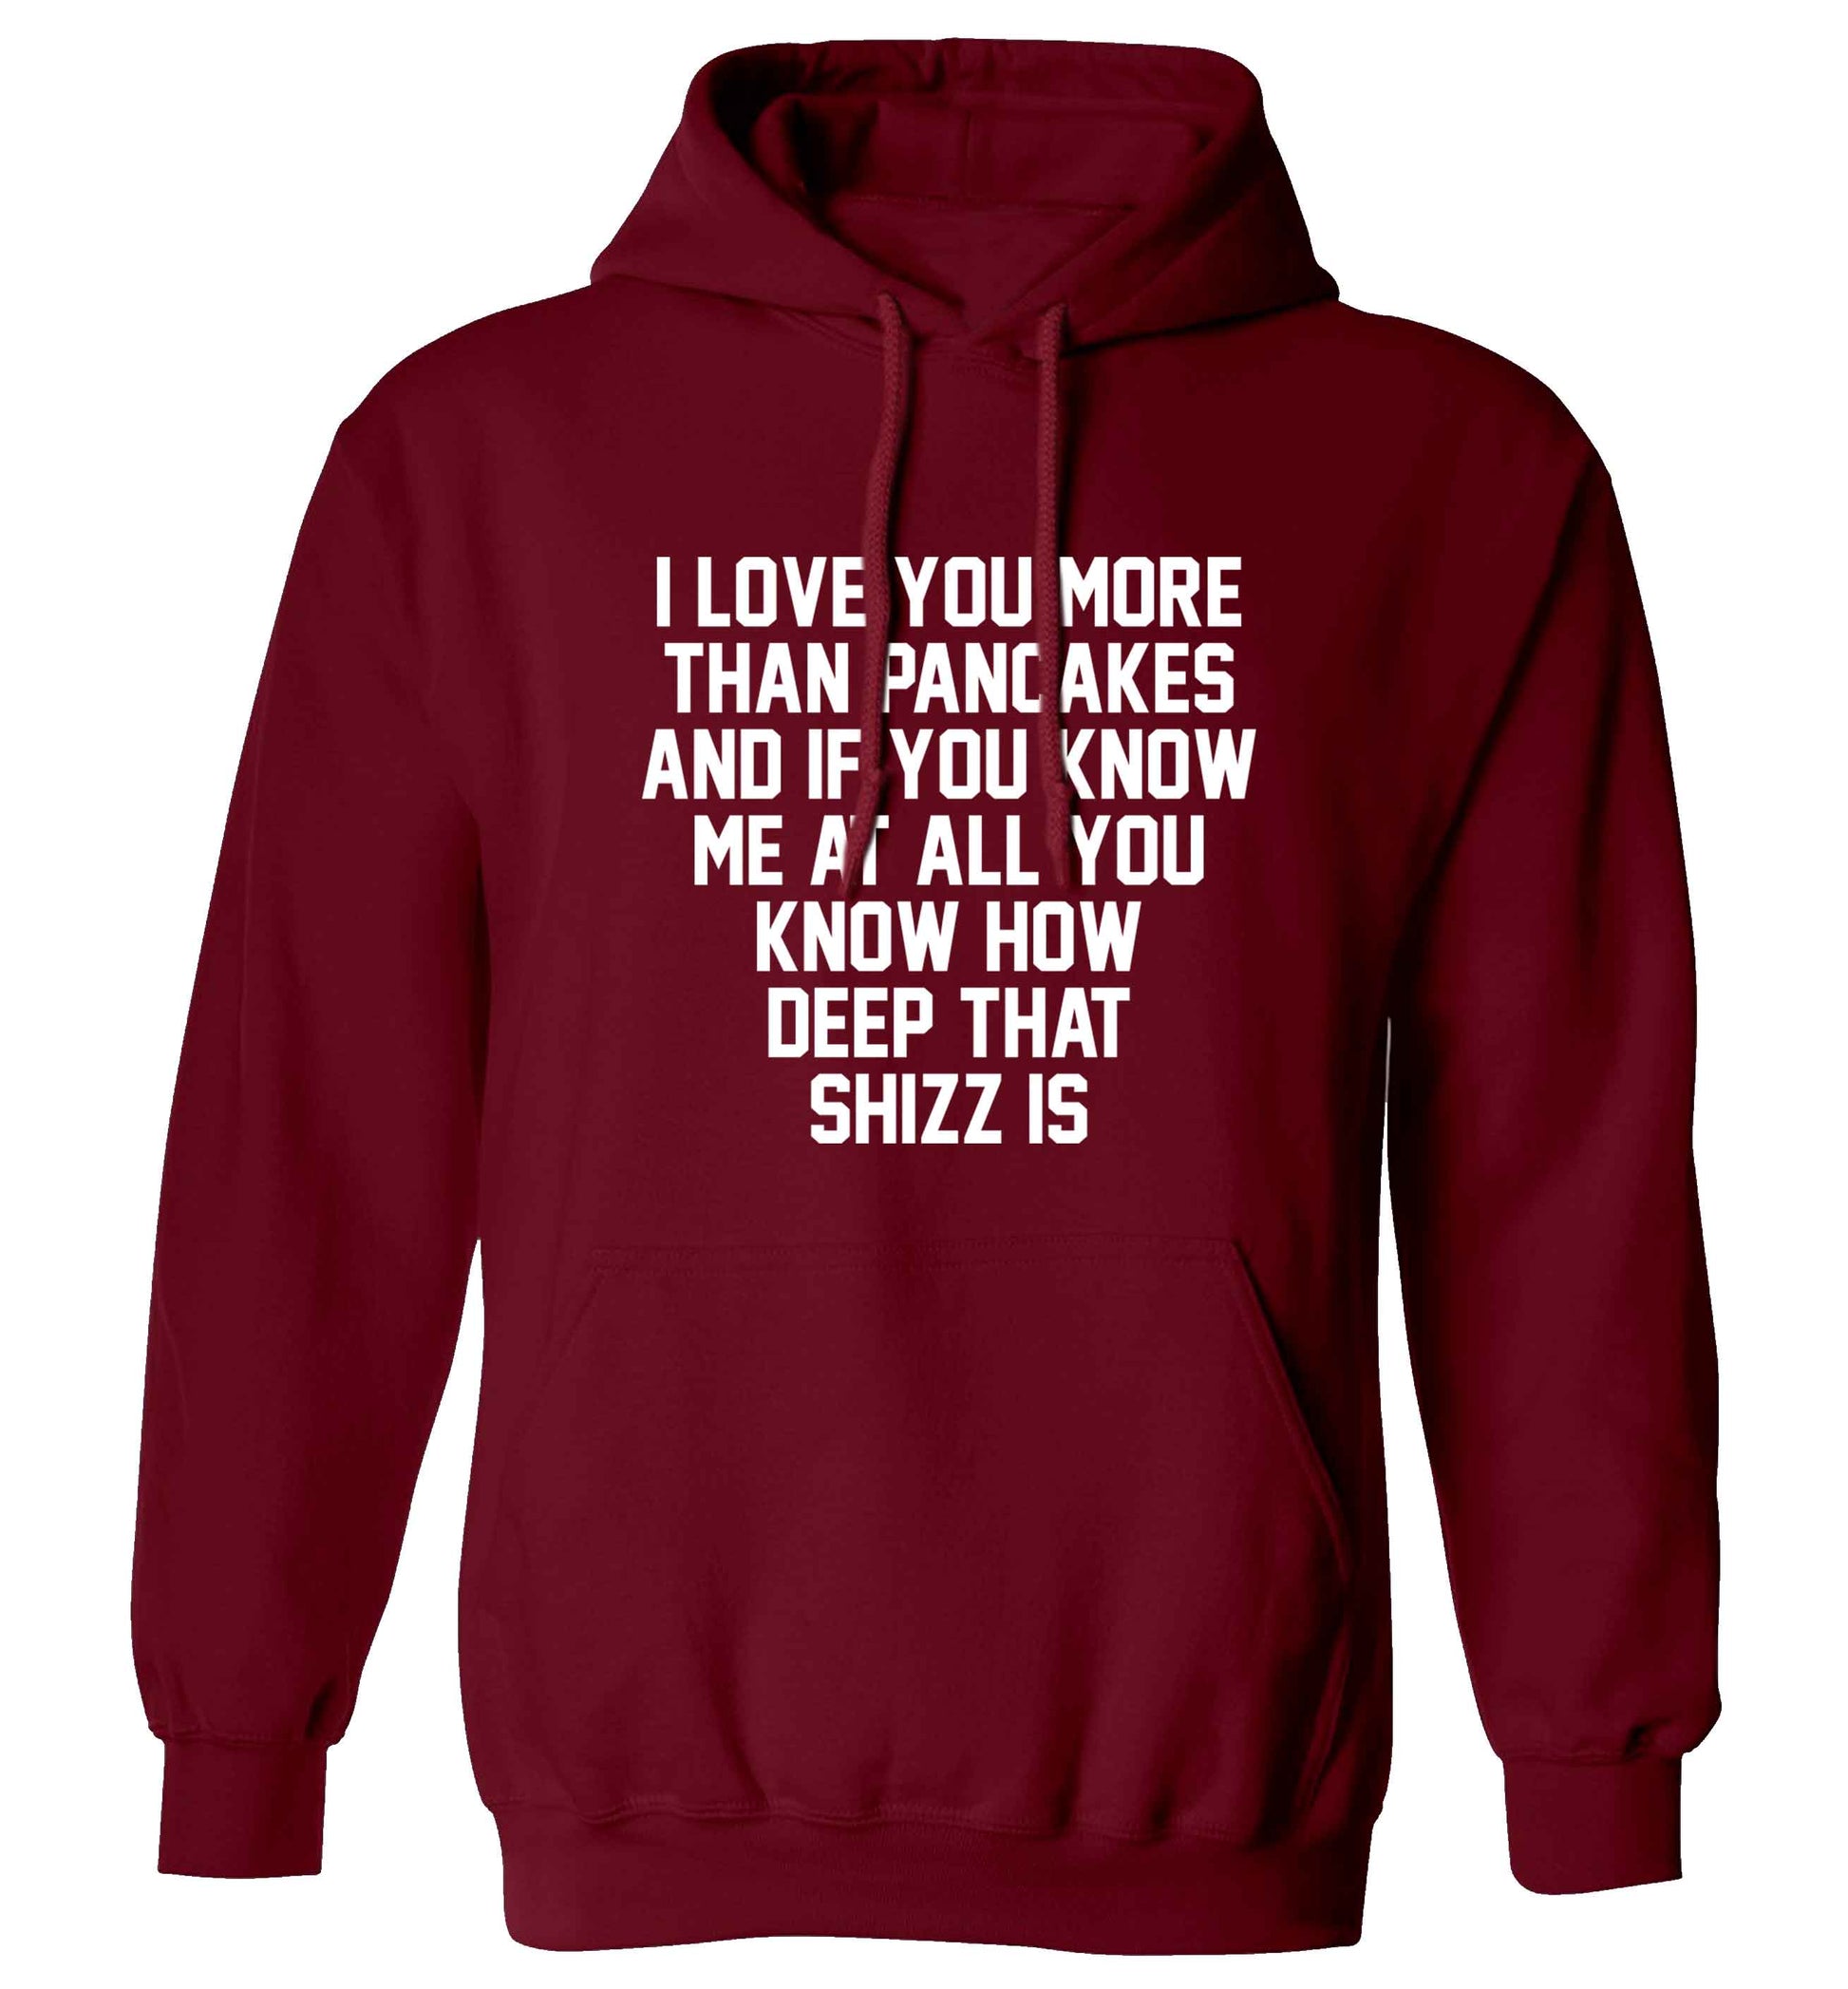 I love you more than pancakes and if you know me at all you know how deep that shizz is adults unisex maroon hoodie 2XL